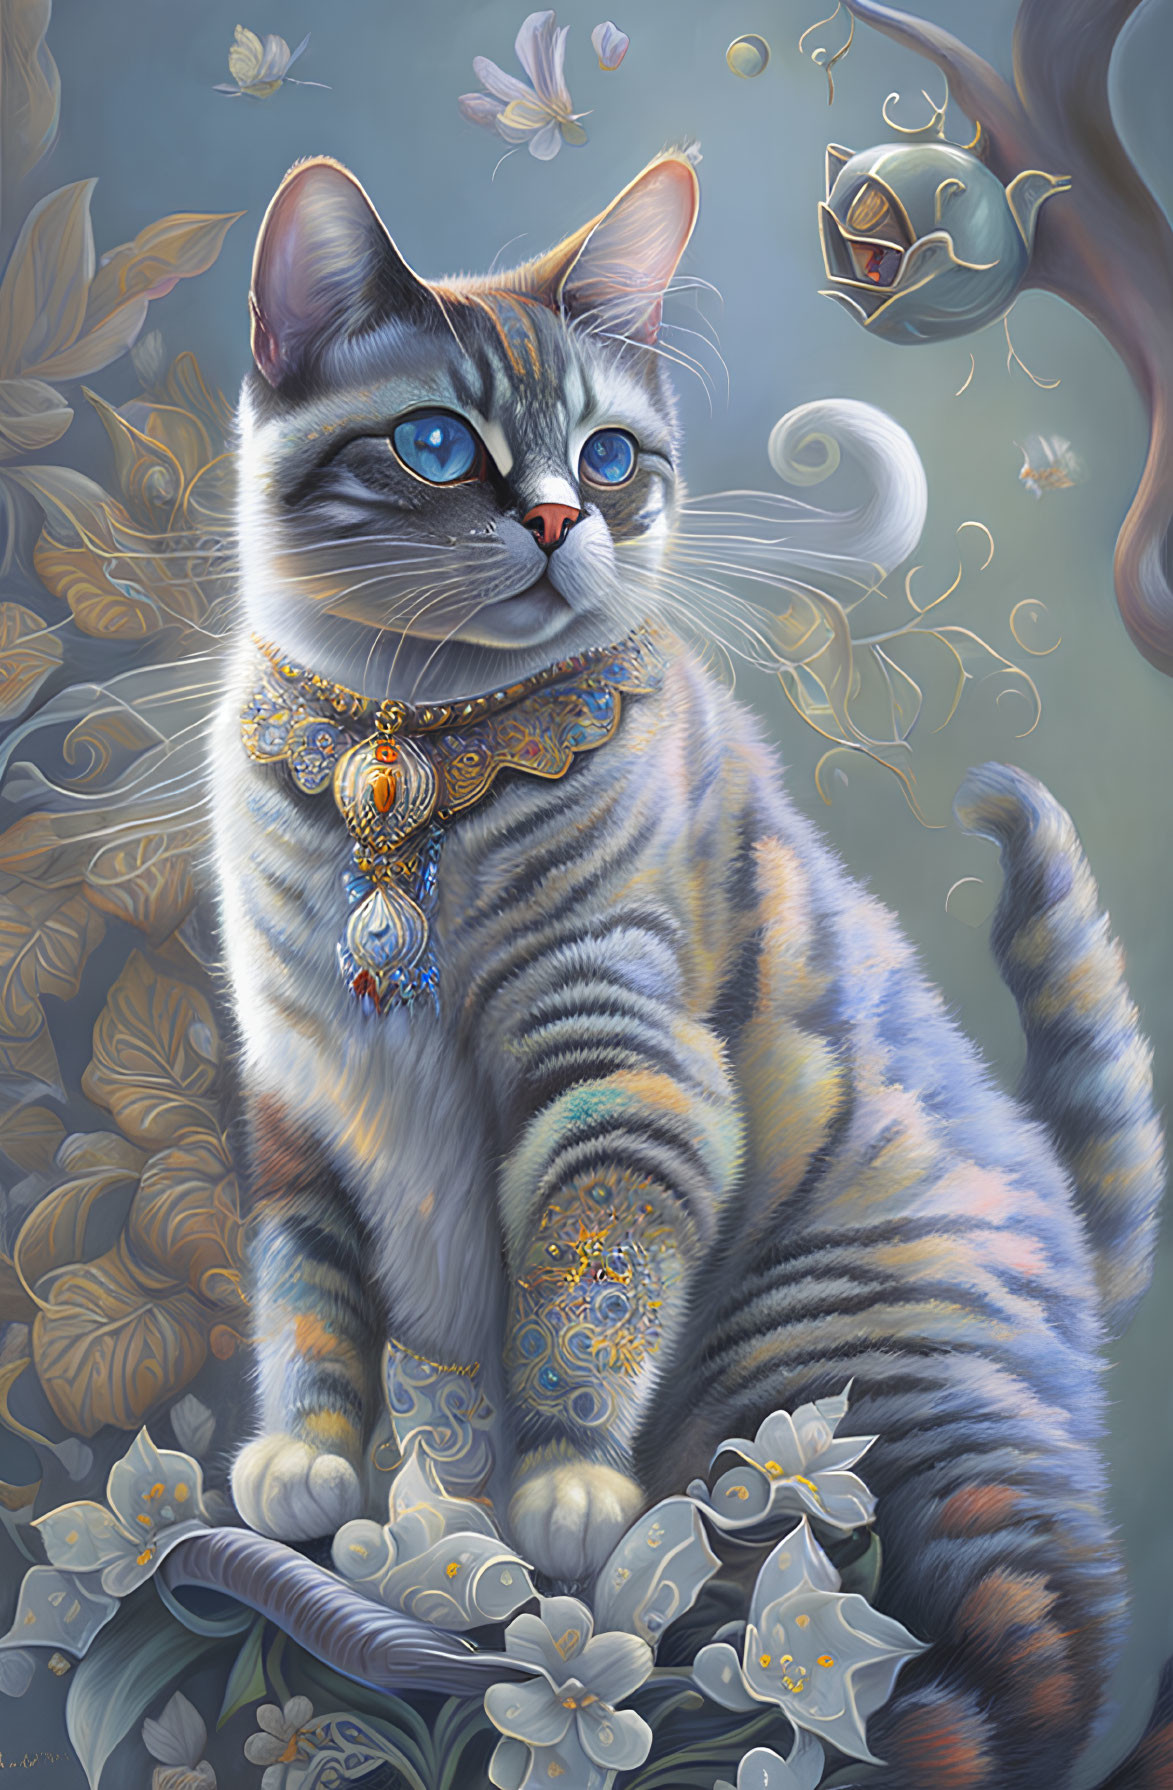 Regal cat with ornate necklace in fantasy setting.